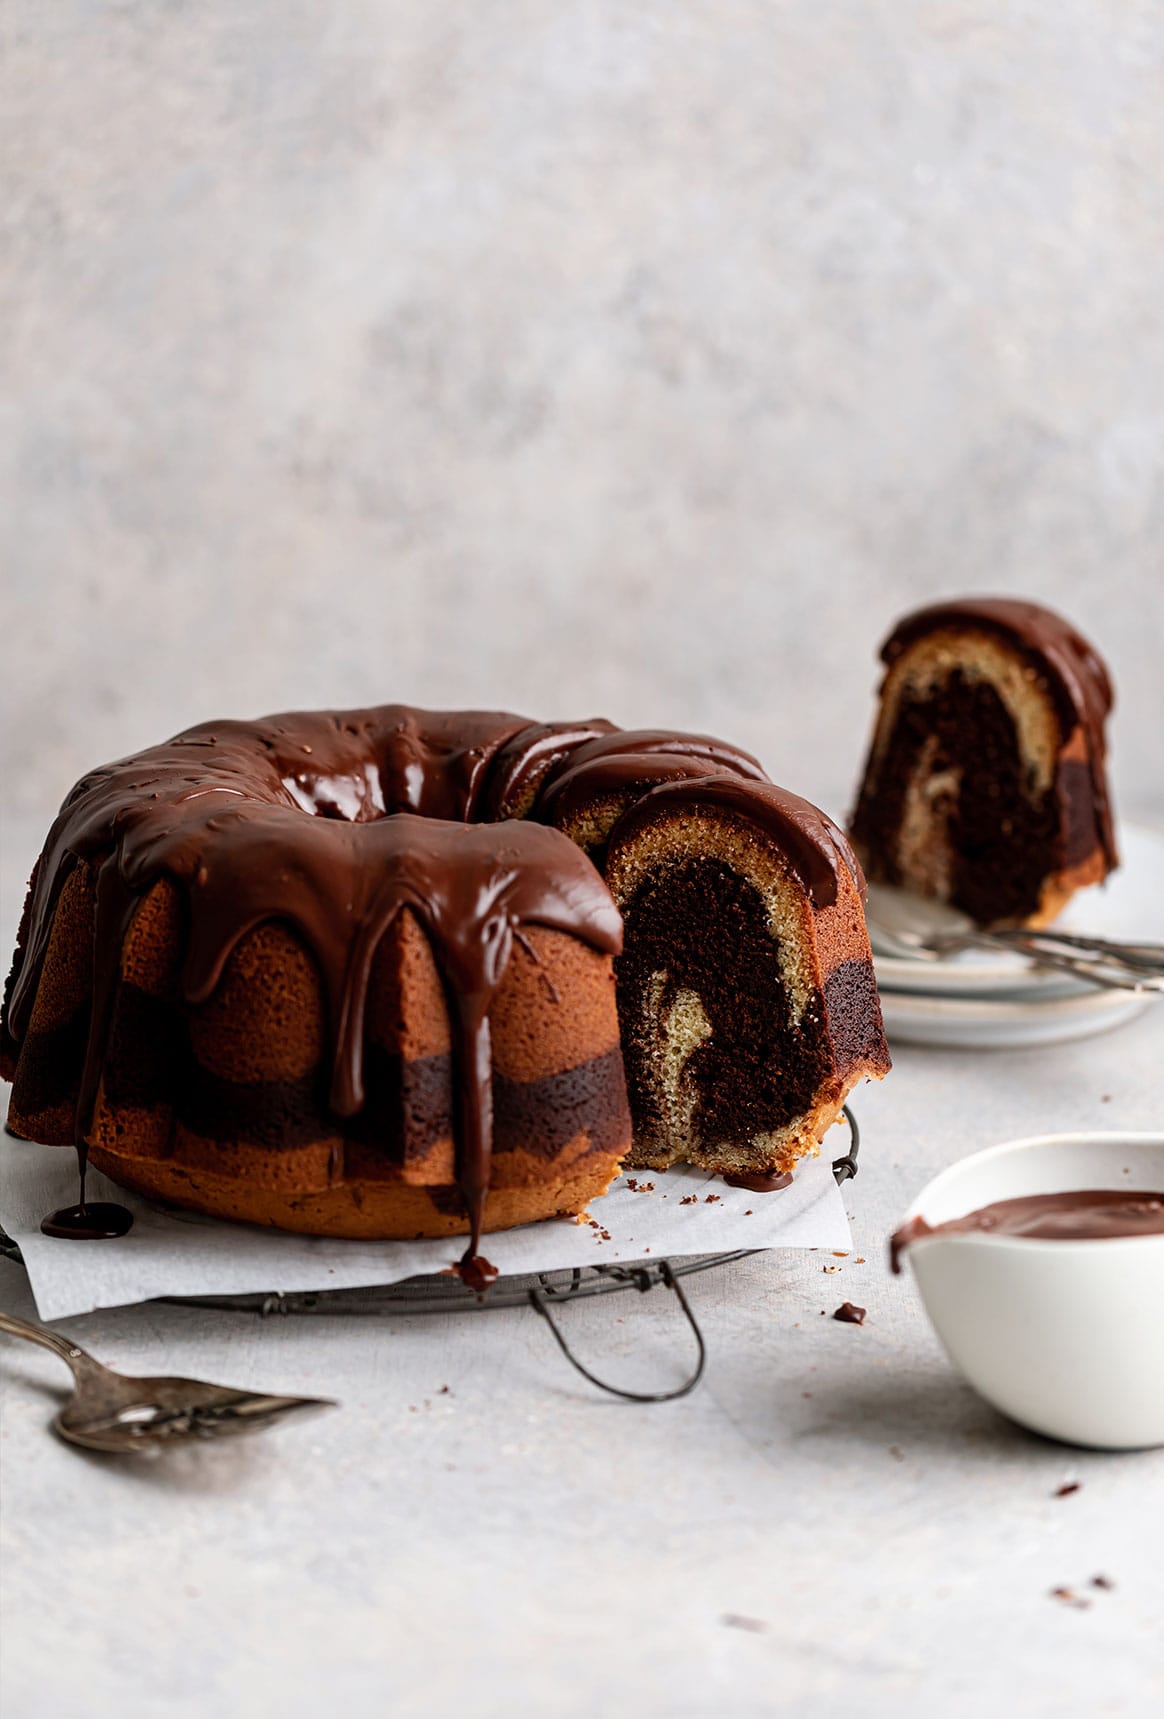 Marble Pound Cake Recipe (in a Loaf Pan) - Dinner, then Dessert